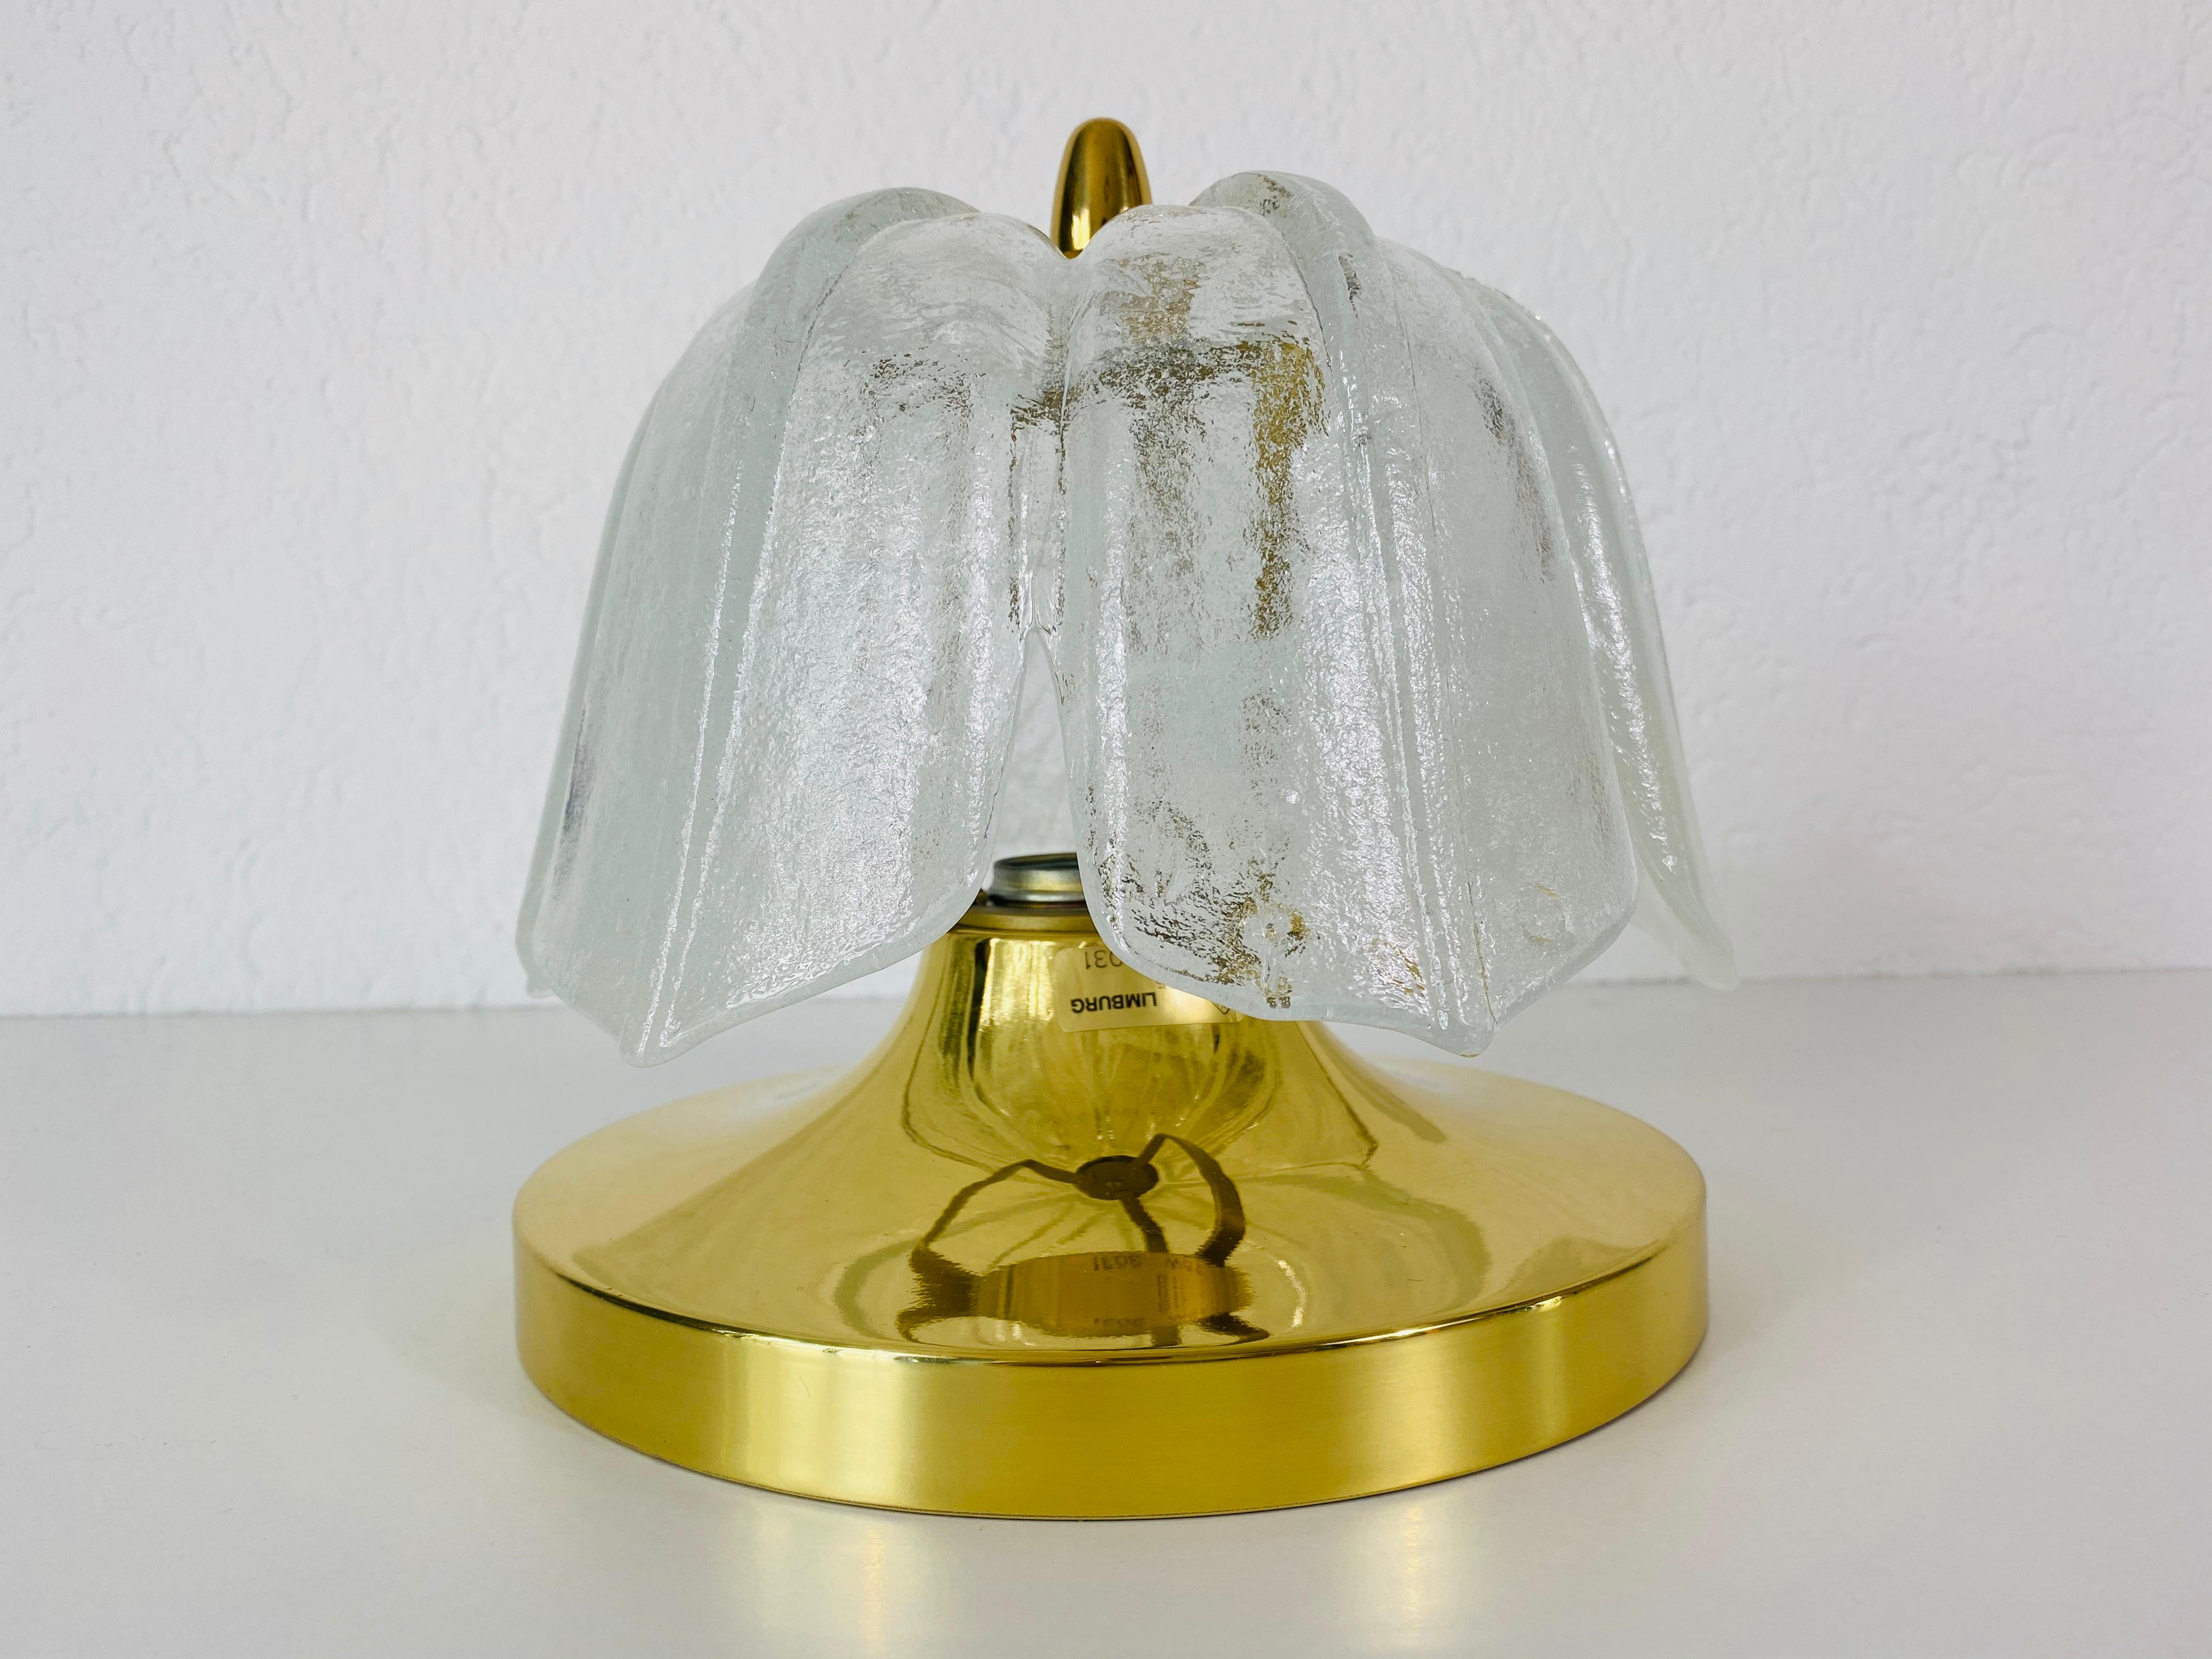 Flushmount by Glashütte Limburg made in Germany in the 1960s. It is fascinating with its crystal glass, which is typical for the German brand. The round top of the light is made of brass.

The light requires one E27 light bulb. Very good vintage